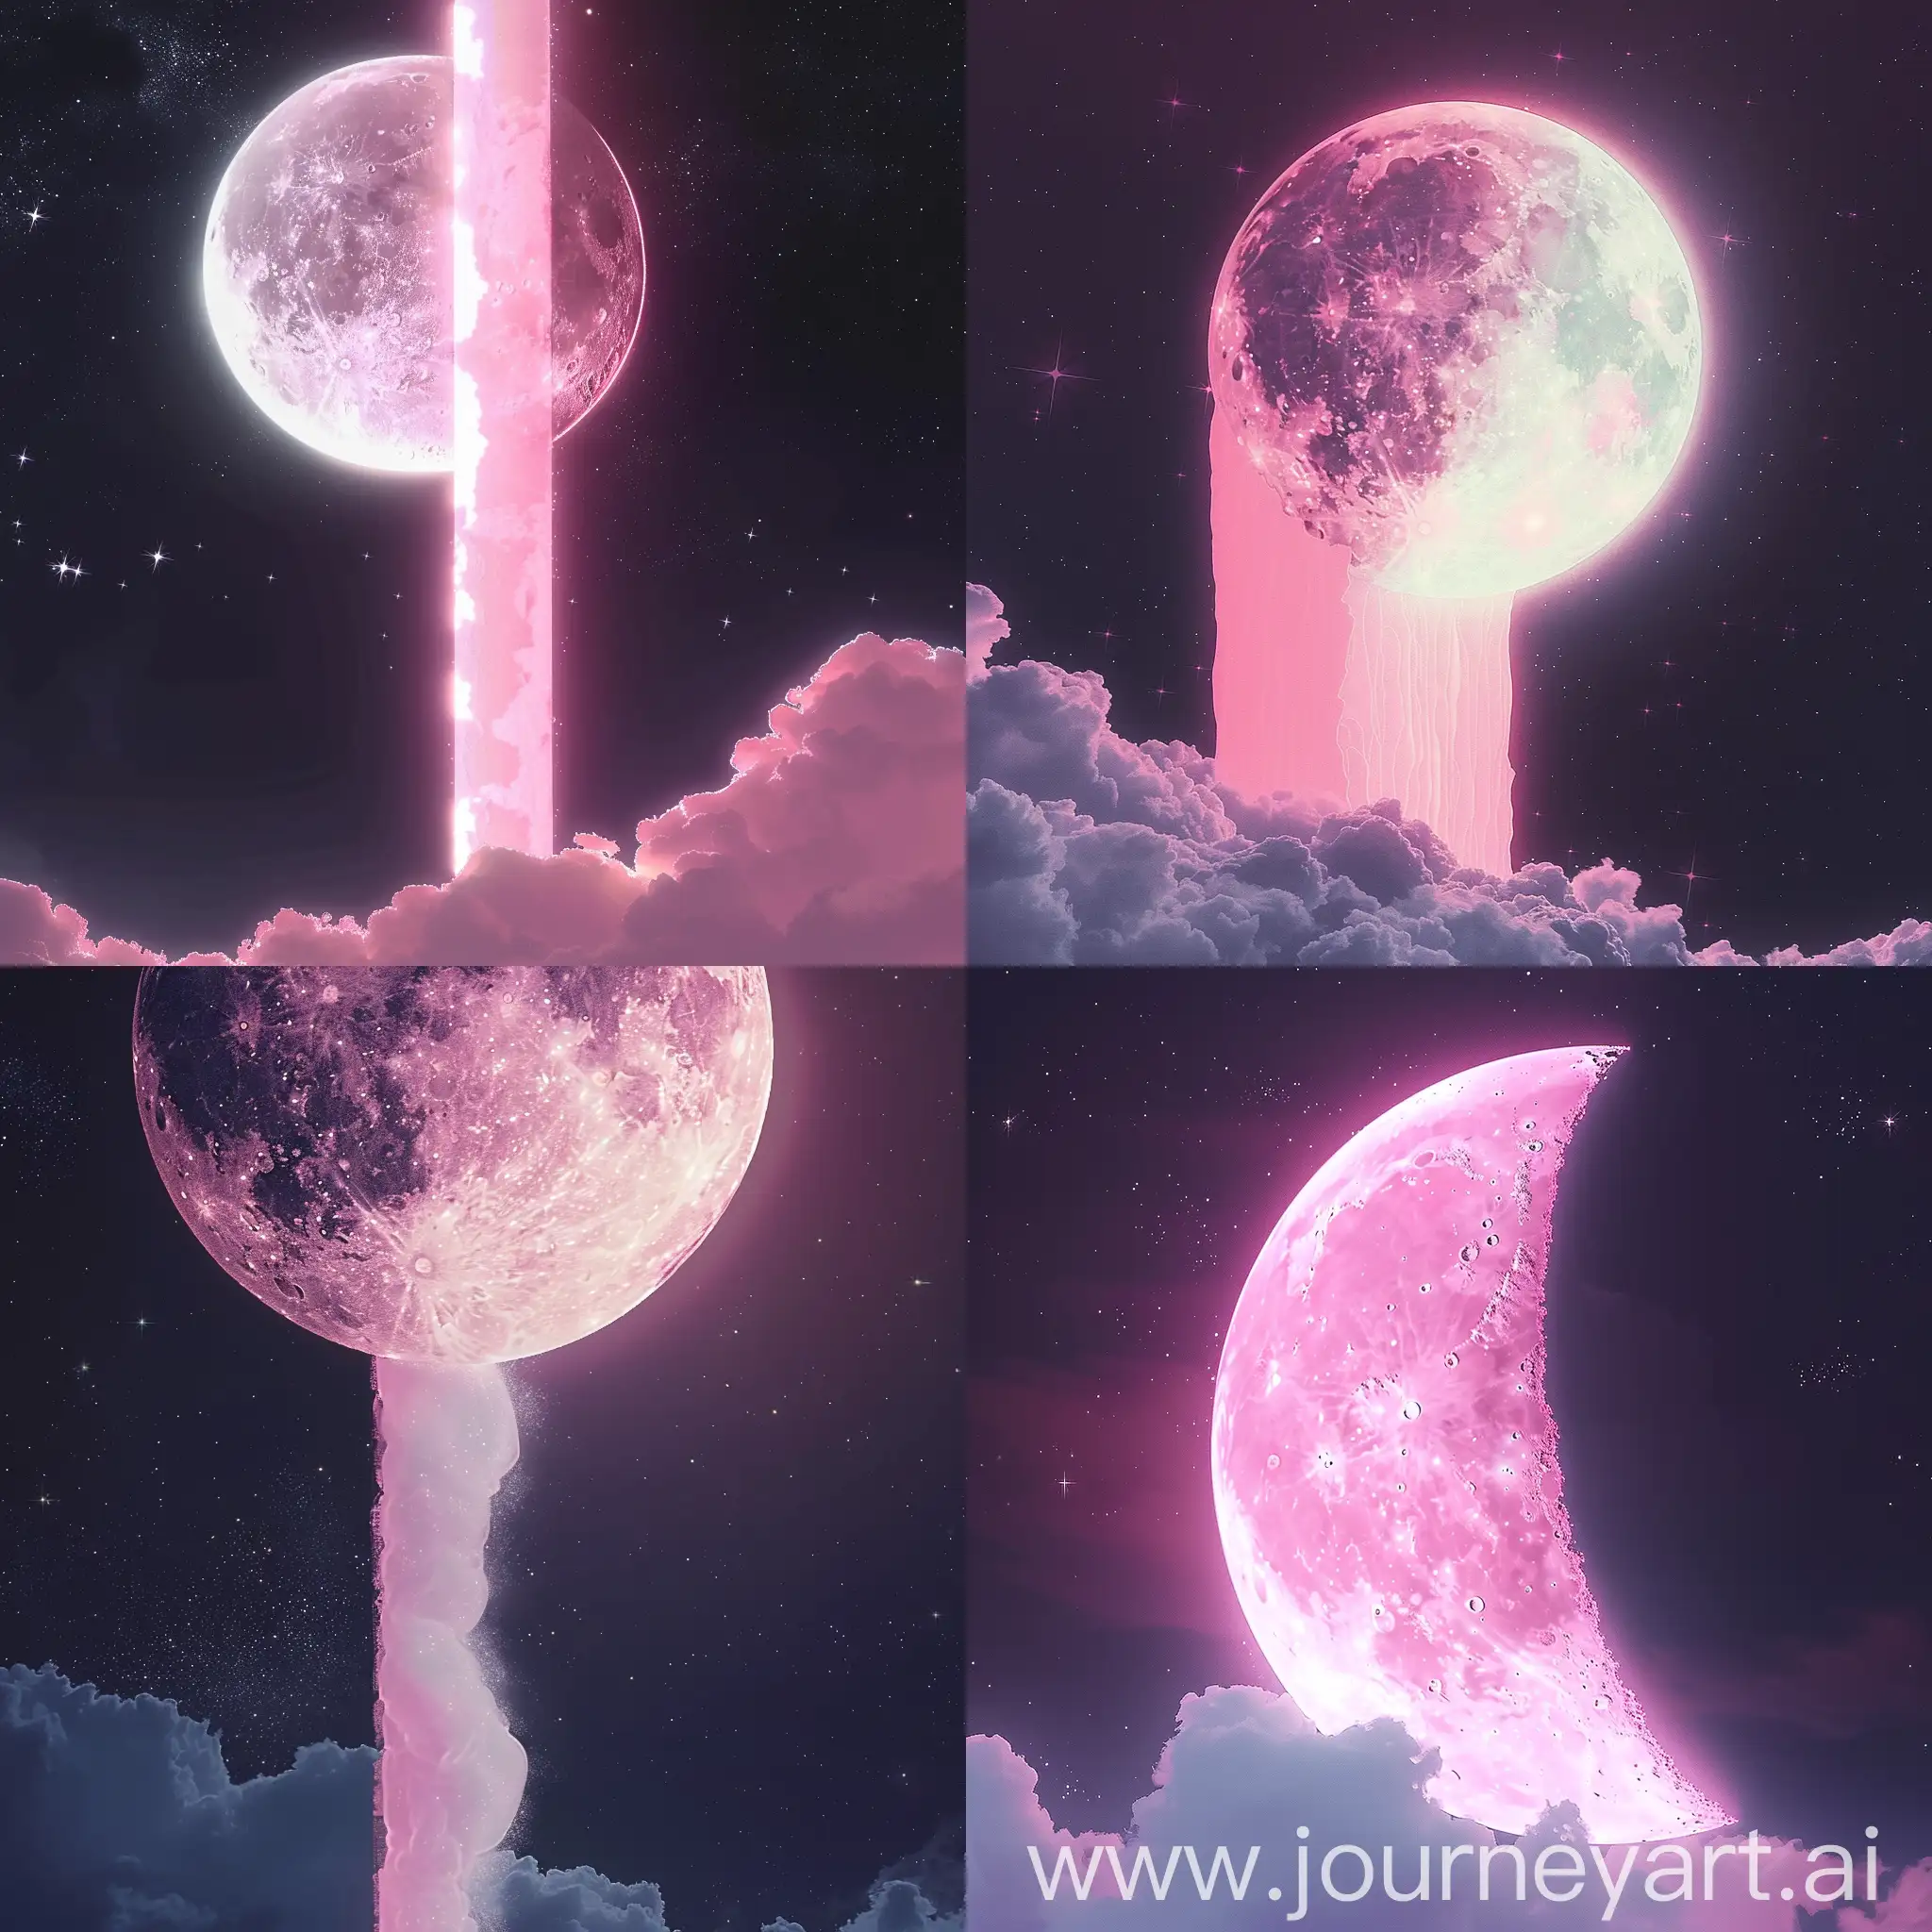 Majestic-Glowing-Pink-Moon-HalfCovered-by-Cloud-in-Starry-Night-Sky